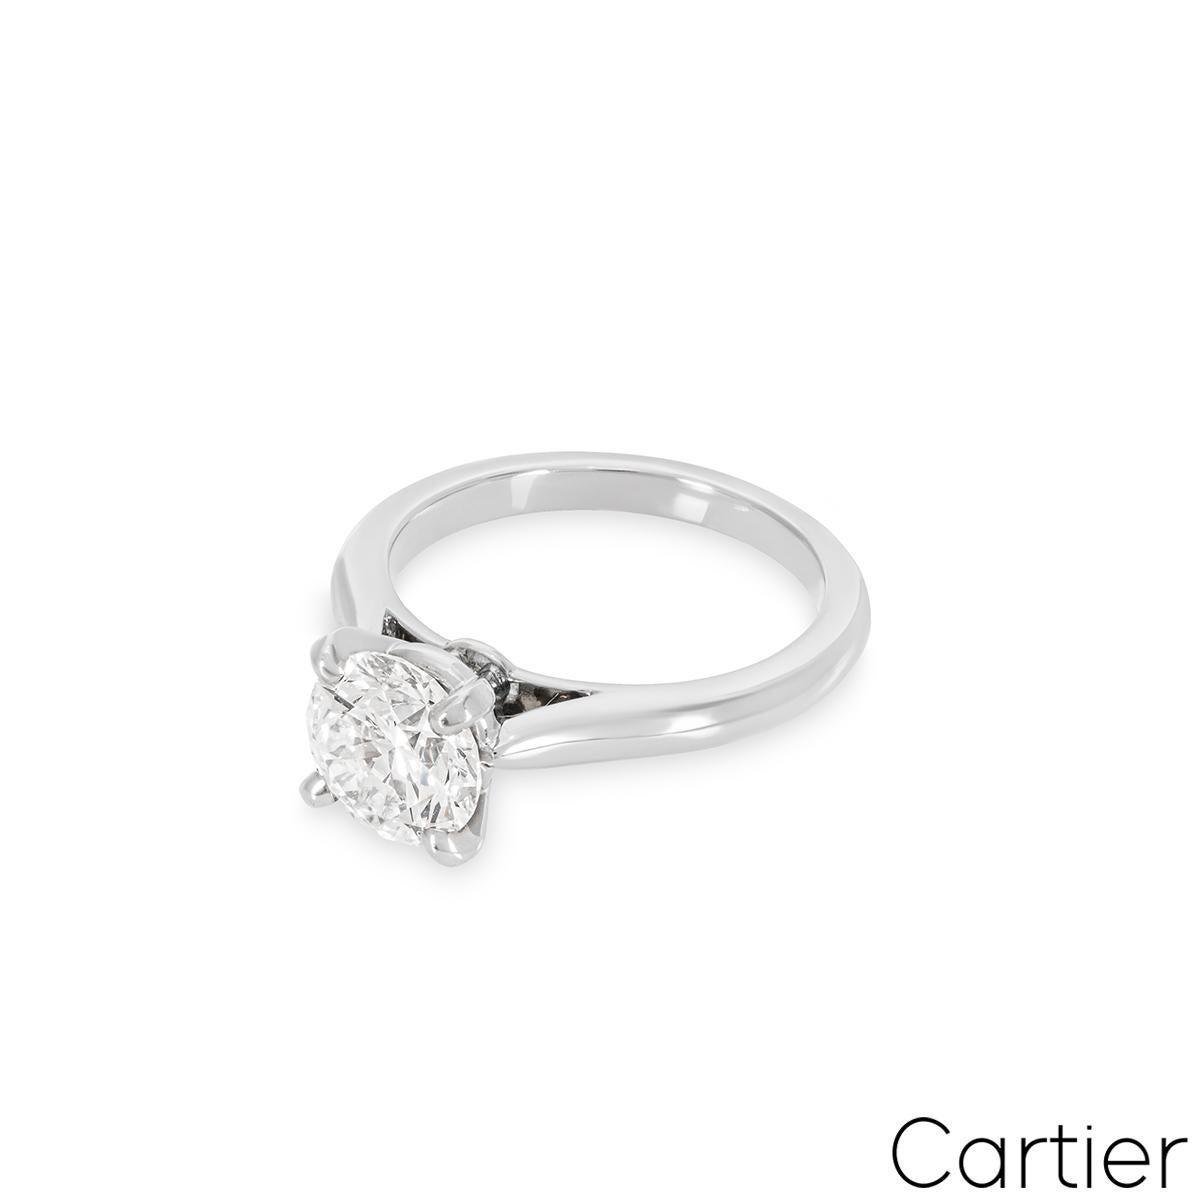 Cartier Platinum Round Brilliant Cut Solitaire 1895 Ring 1.37ct G/VVS1 GIA Cert In Excellent Condition For Sale In London, GB